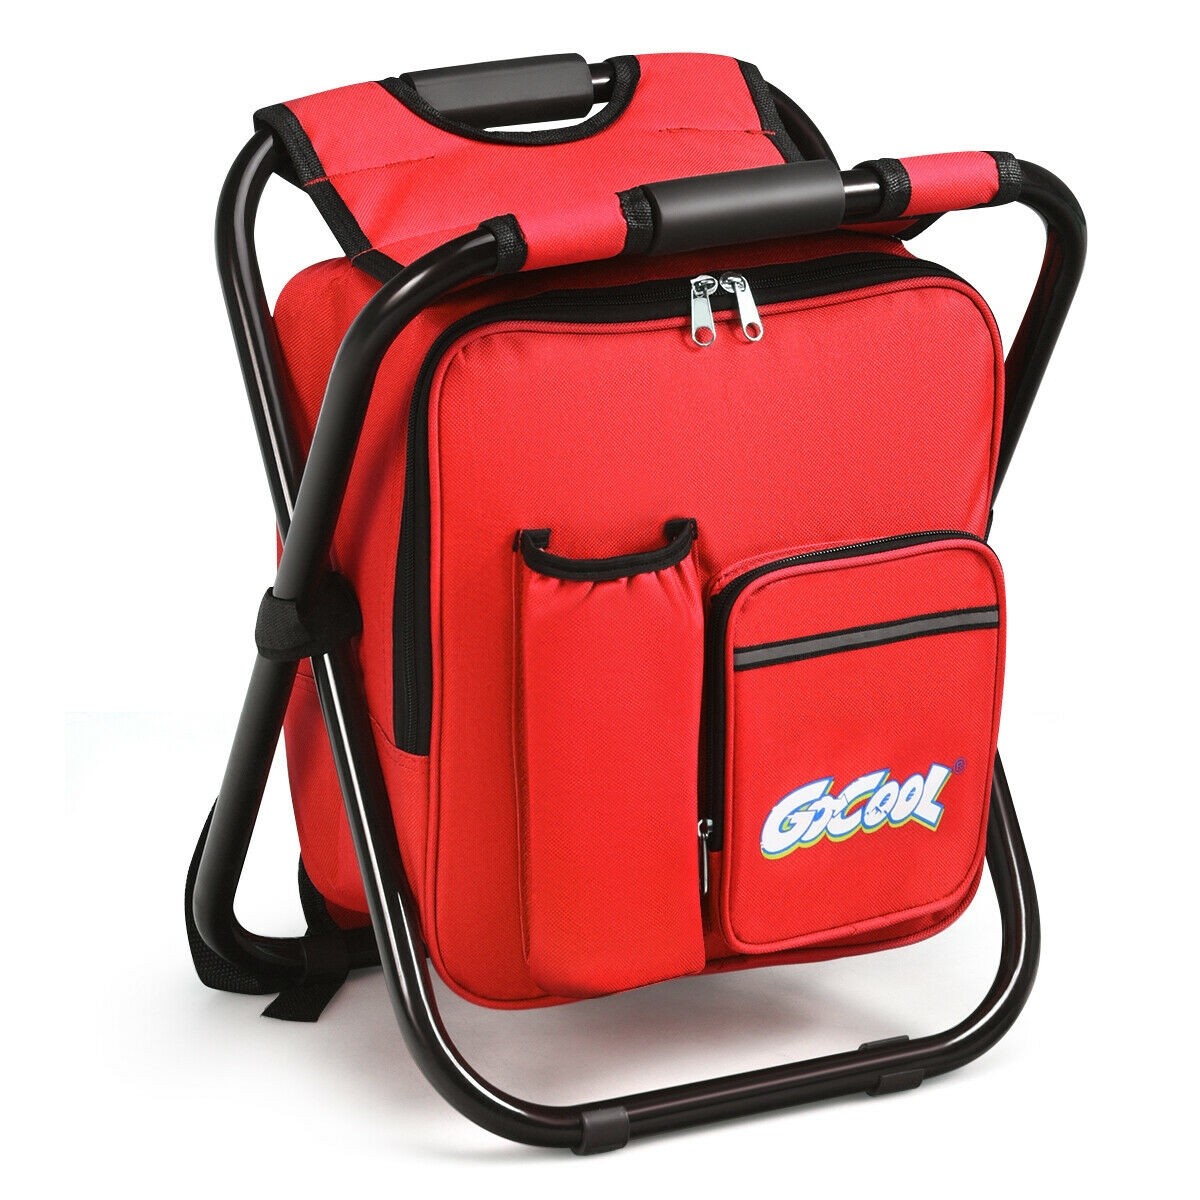 3 In 1 Cooler Backpack Chair For Hiking Events